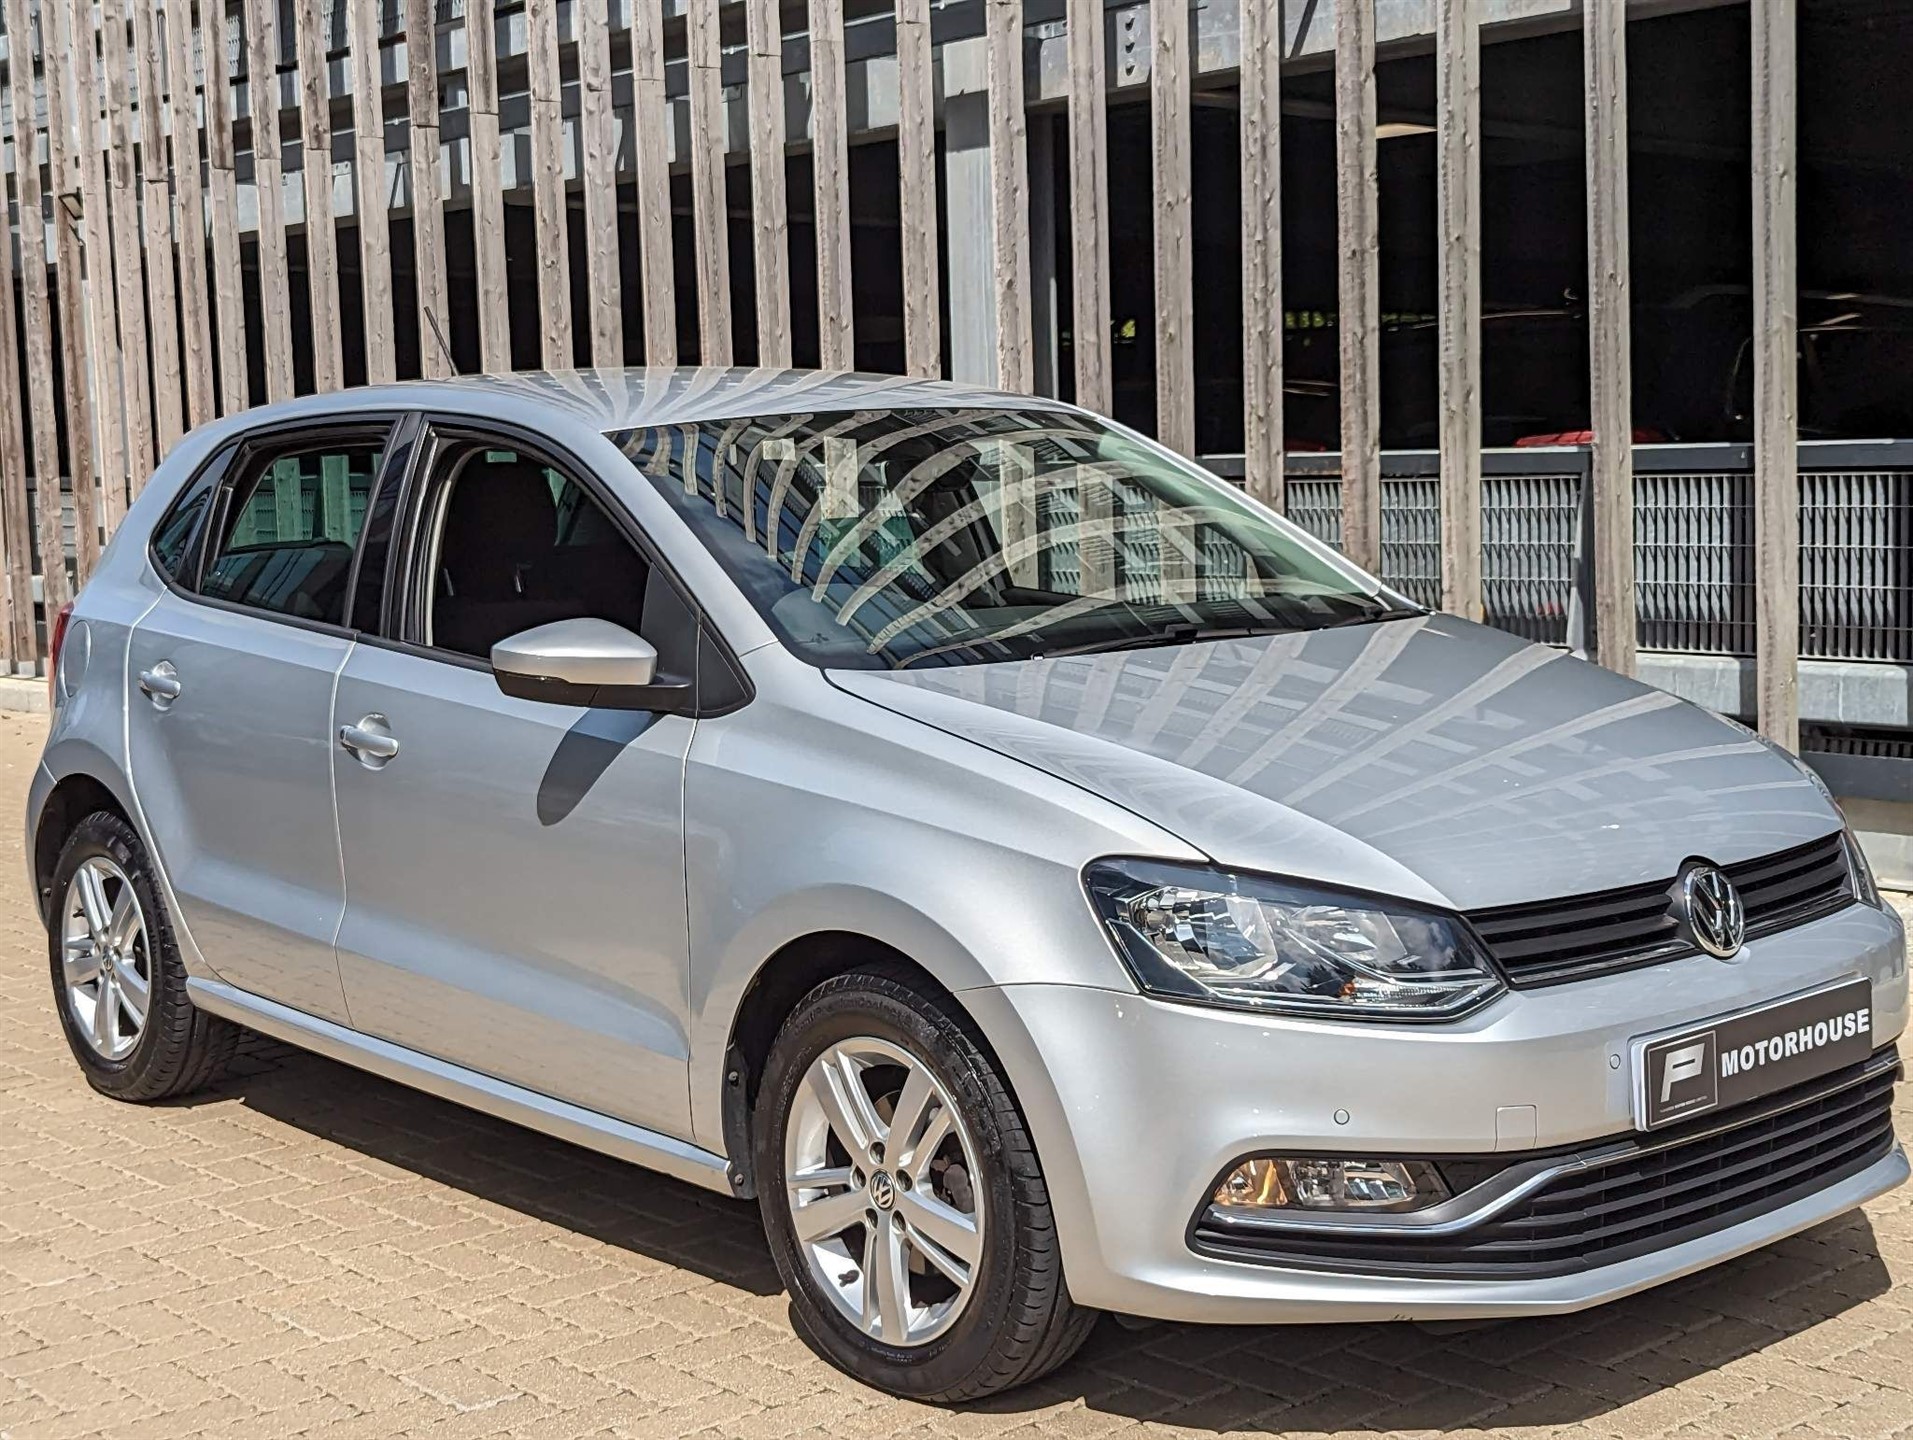 Used Volkswagen Polo for sale in Watford, Hertfordshire | Paradox Motor  House